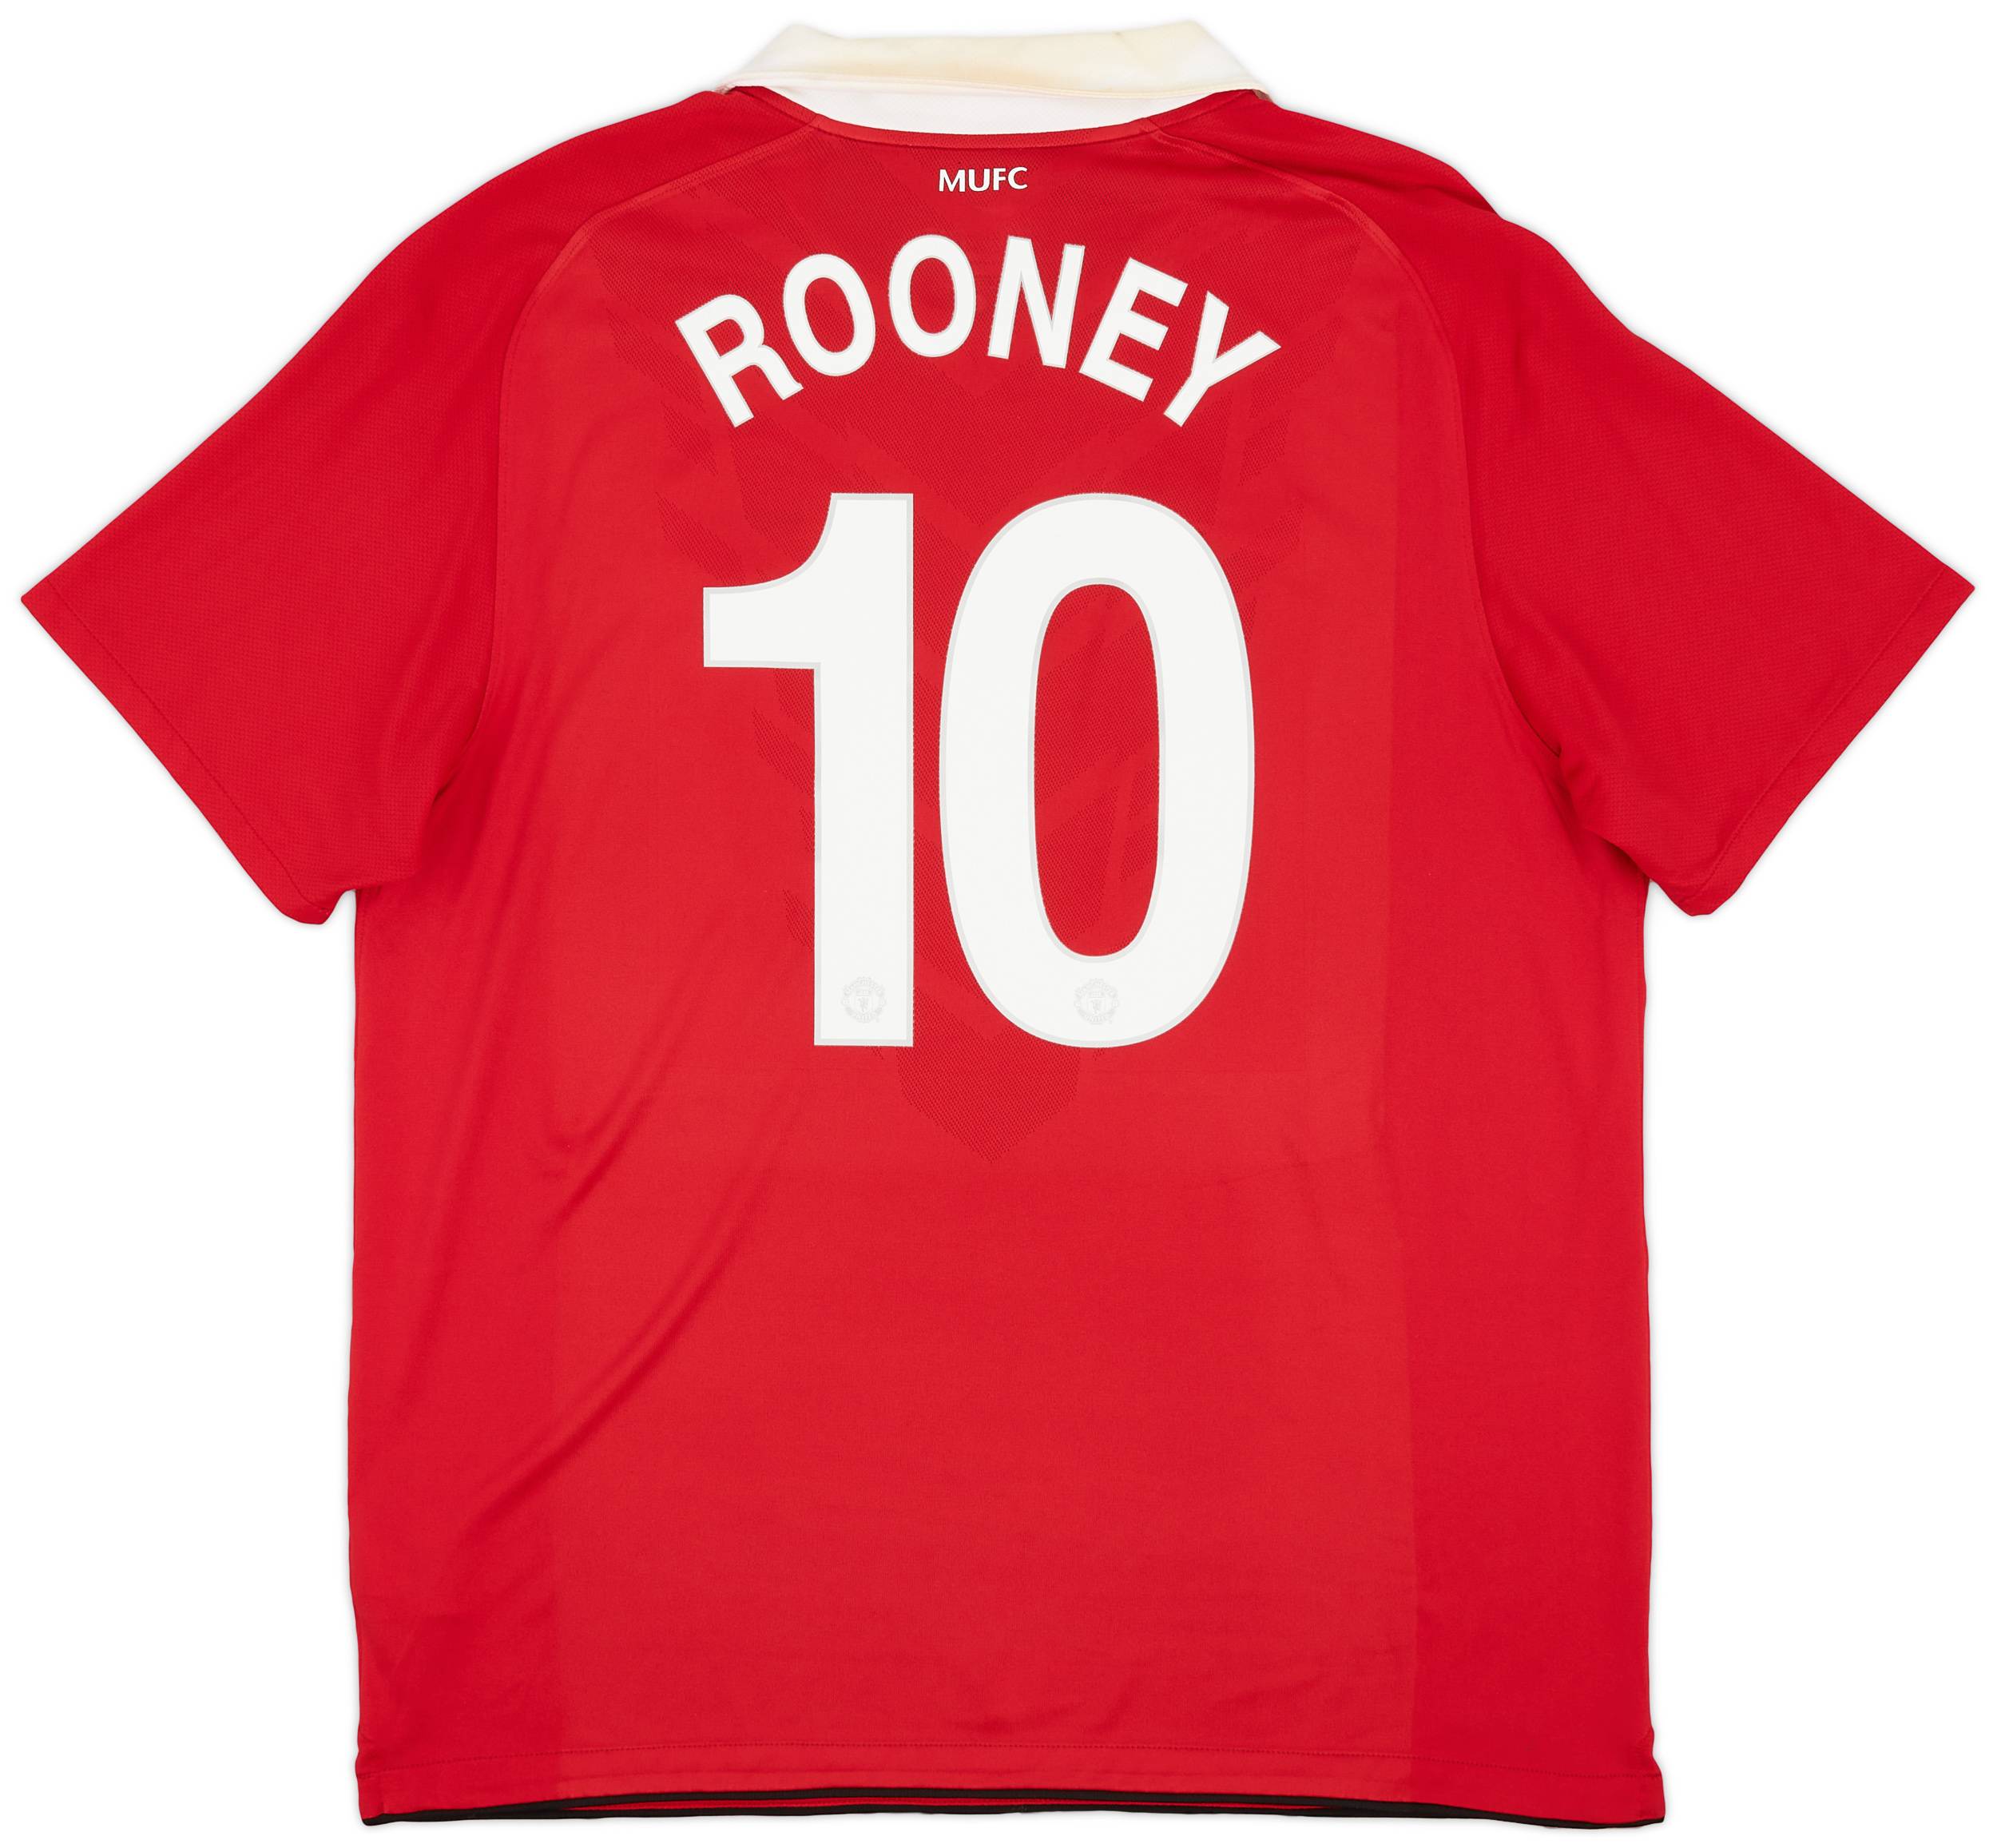 2010-11 Manchester United Home Shirt Rooney #10 - 6/10 - (XL)